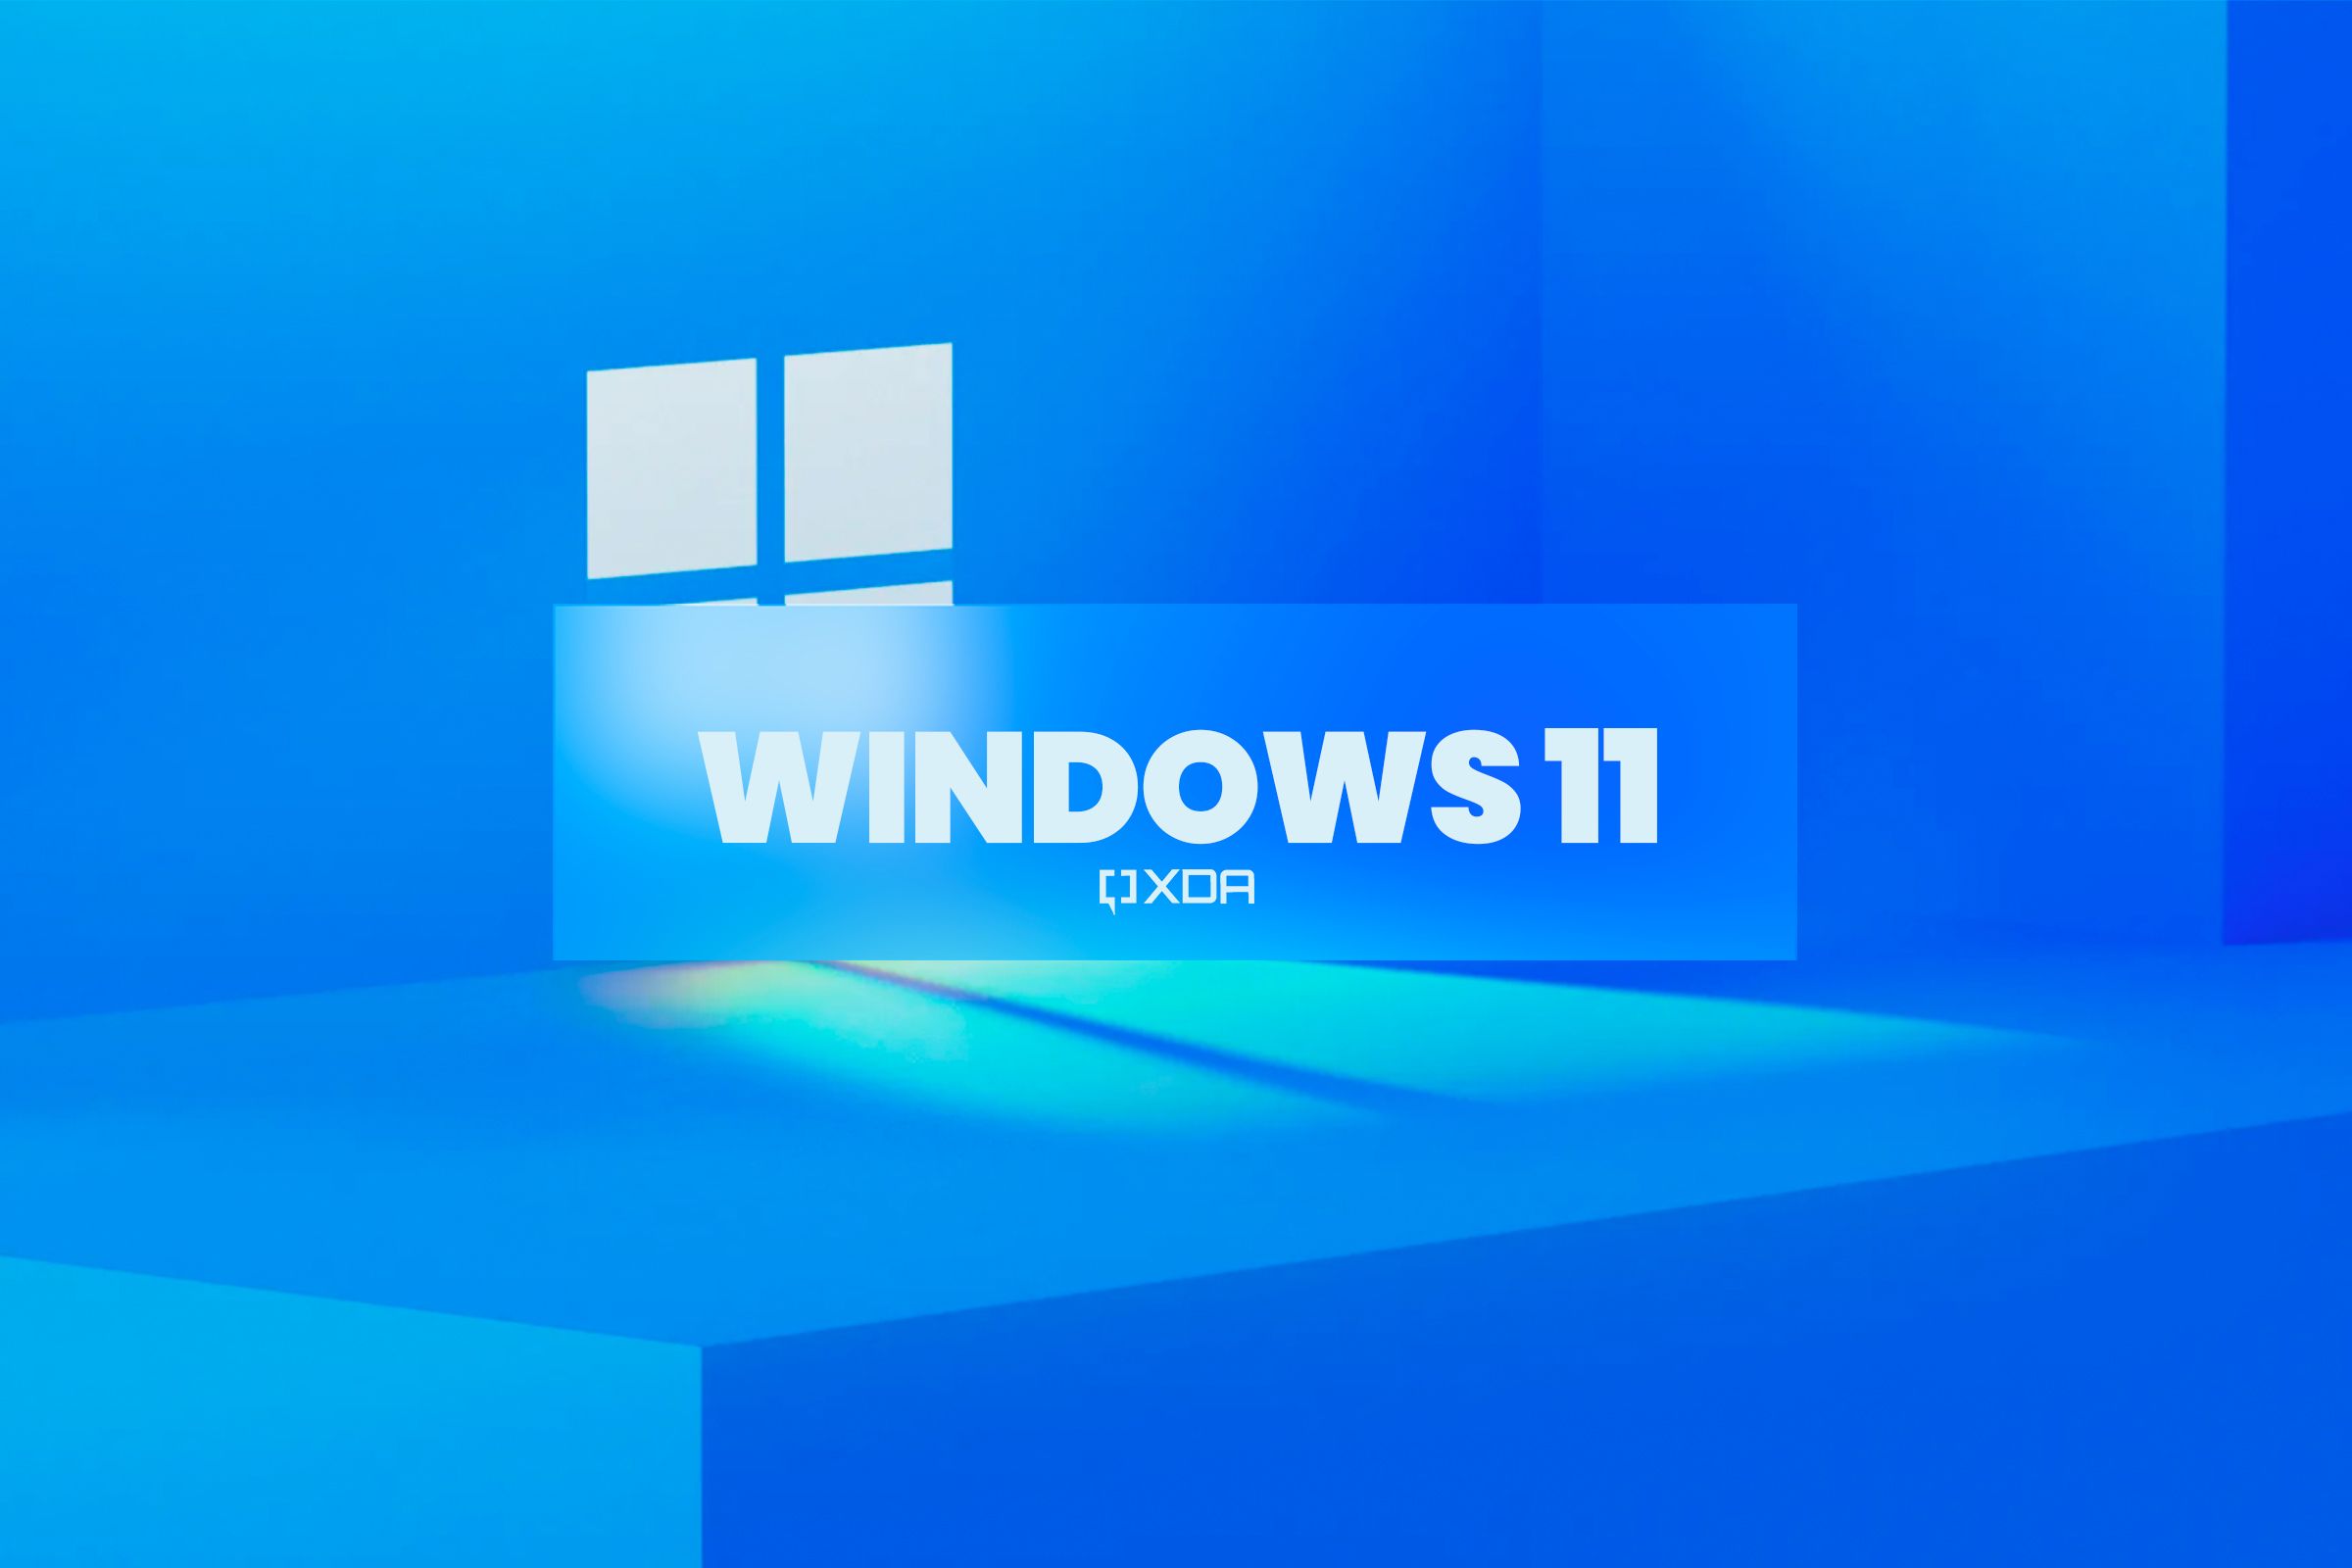 Latest Windows 11 22H2 Release Preview build brings lots of cool new stuff for you to try